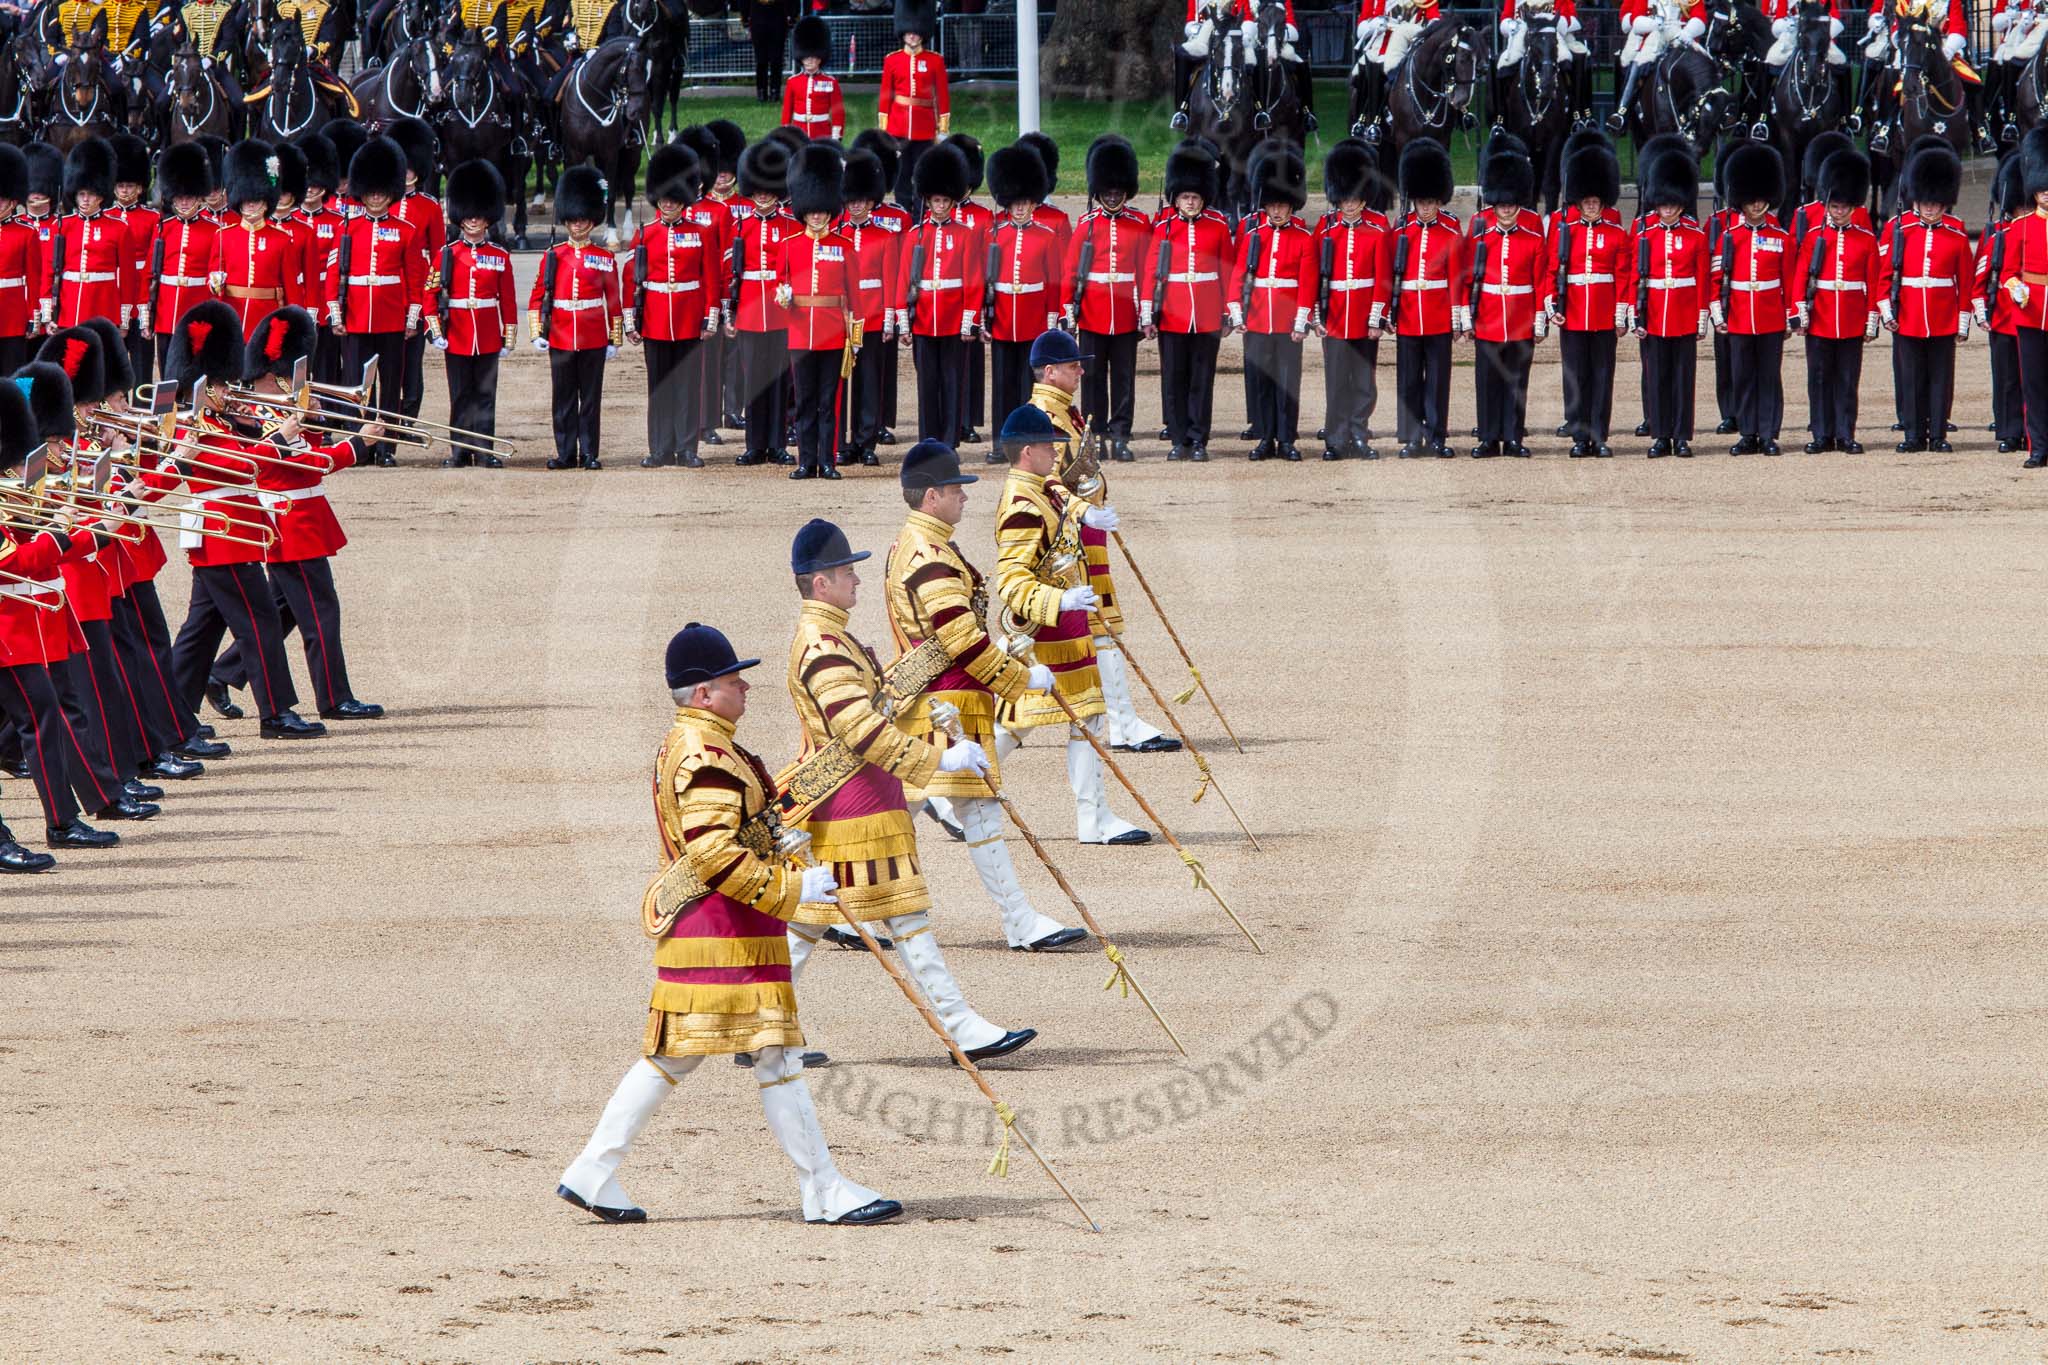 The Colonel's Review 2013: The Massed Band Troop begins with the slow march - the Waltz from Les Huguenots..
Horse Guards Parade, Westminster,
London SW1,

United Kingdom,
on 08 June 2013 at 11:08, image #422